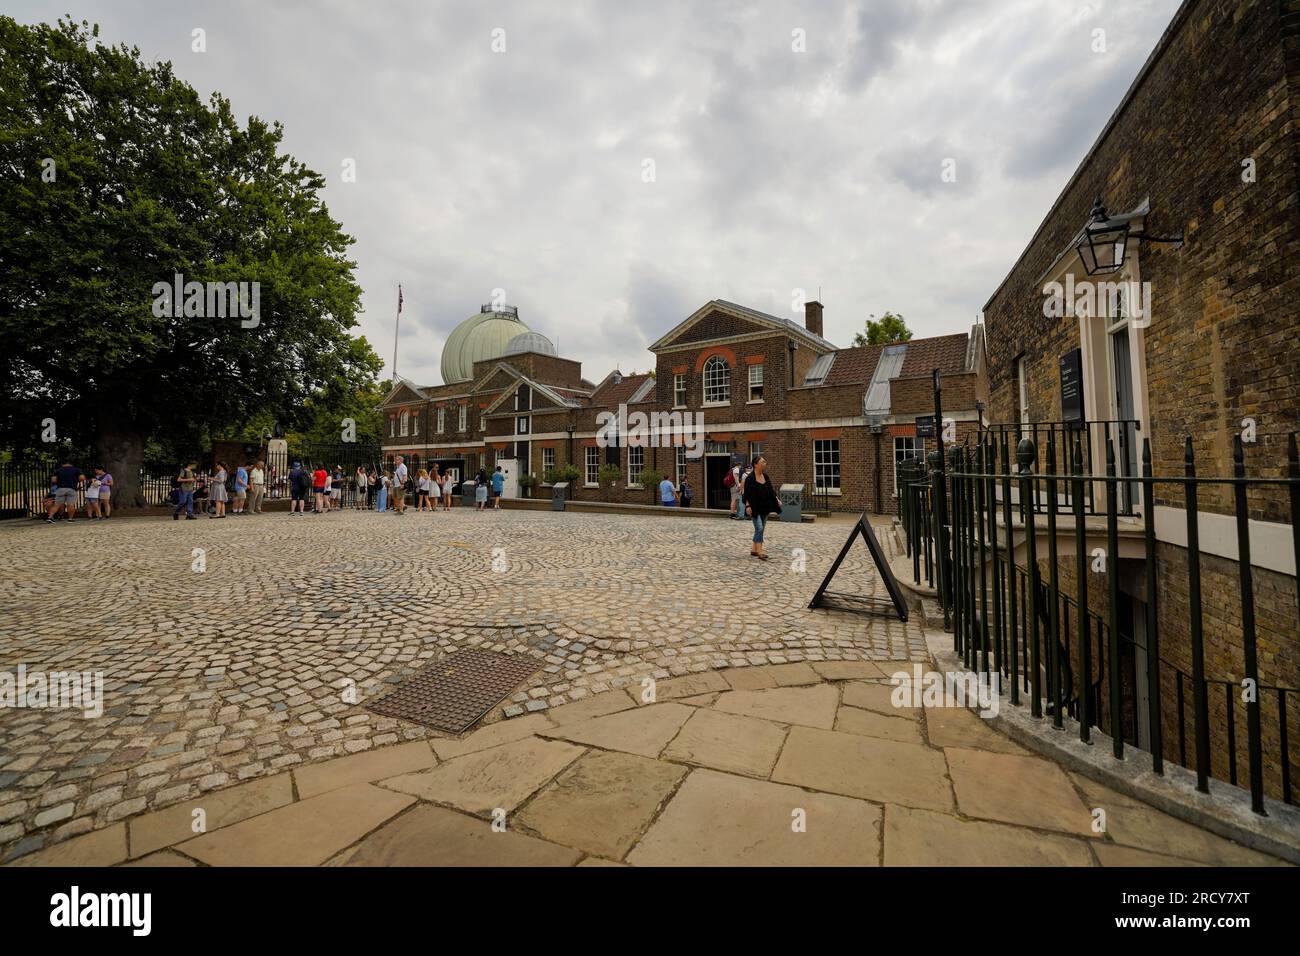 Royal Observatory Greenwich, London. Home to Greenwich Mean Time (GMT), the Prime Meridian of the world and one of the UK's largest telescopes. Visit. Stock Photo